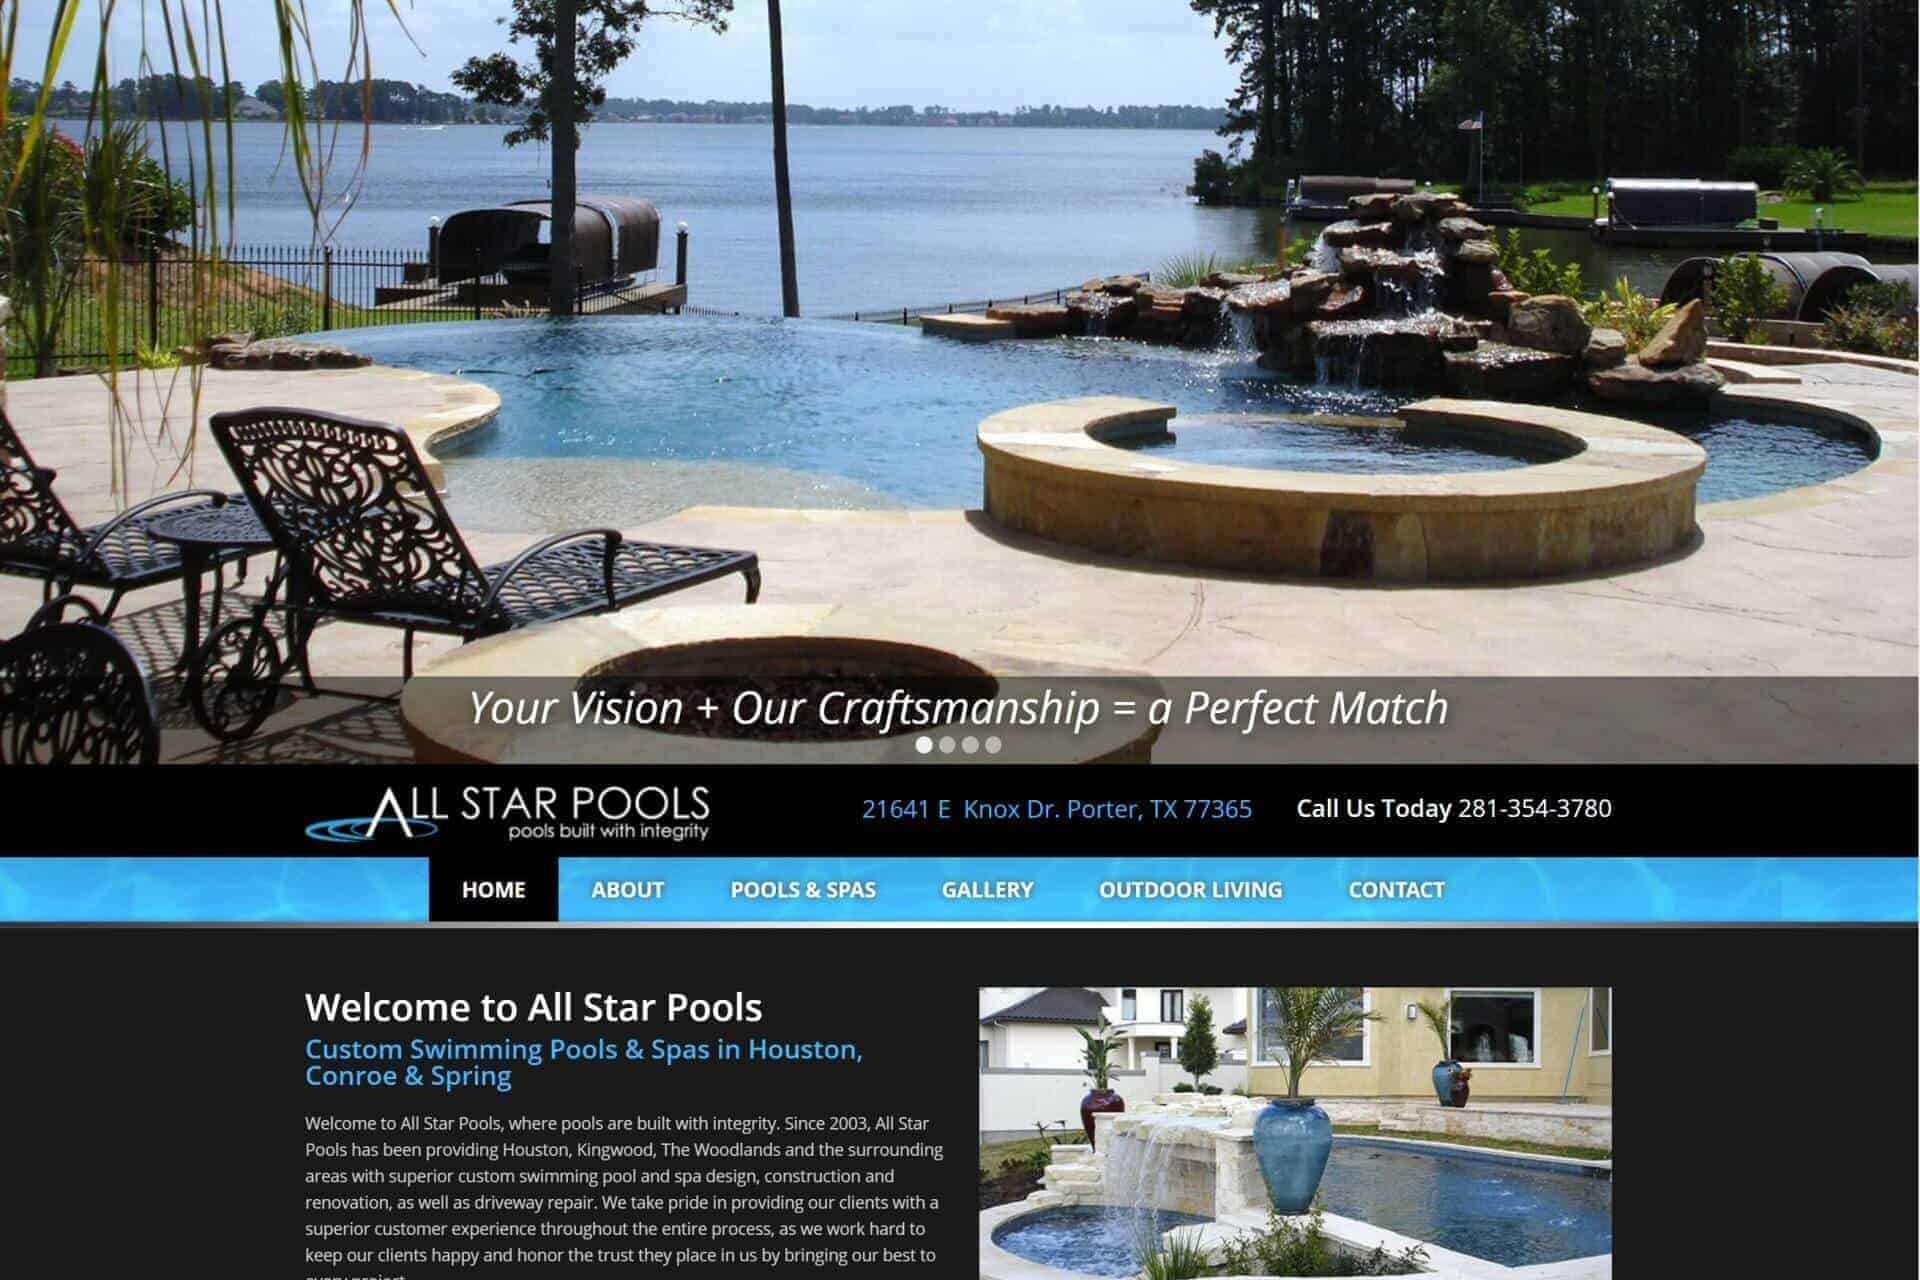 All Star Pools by MW Strategic Services